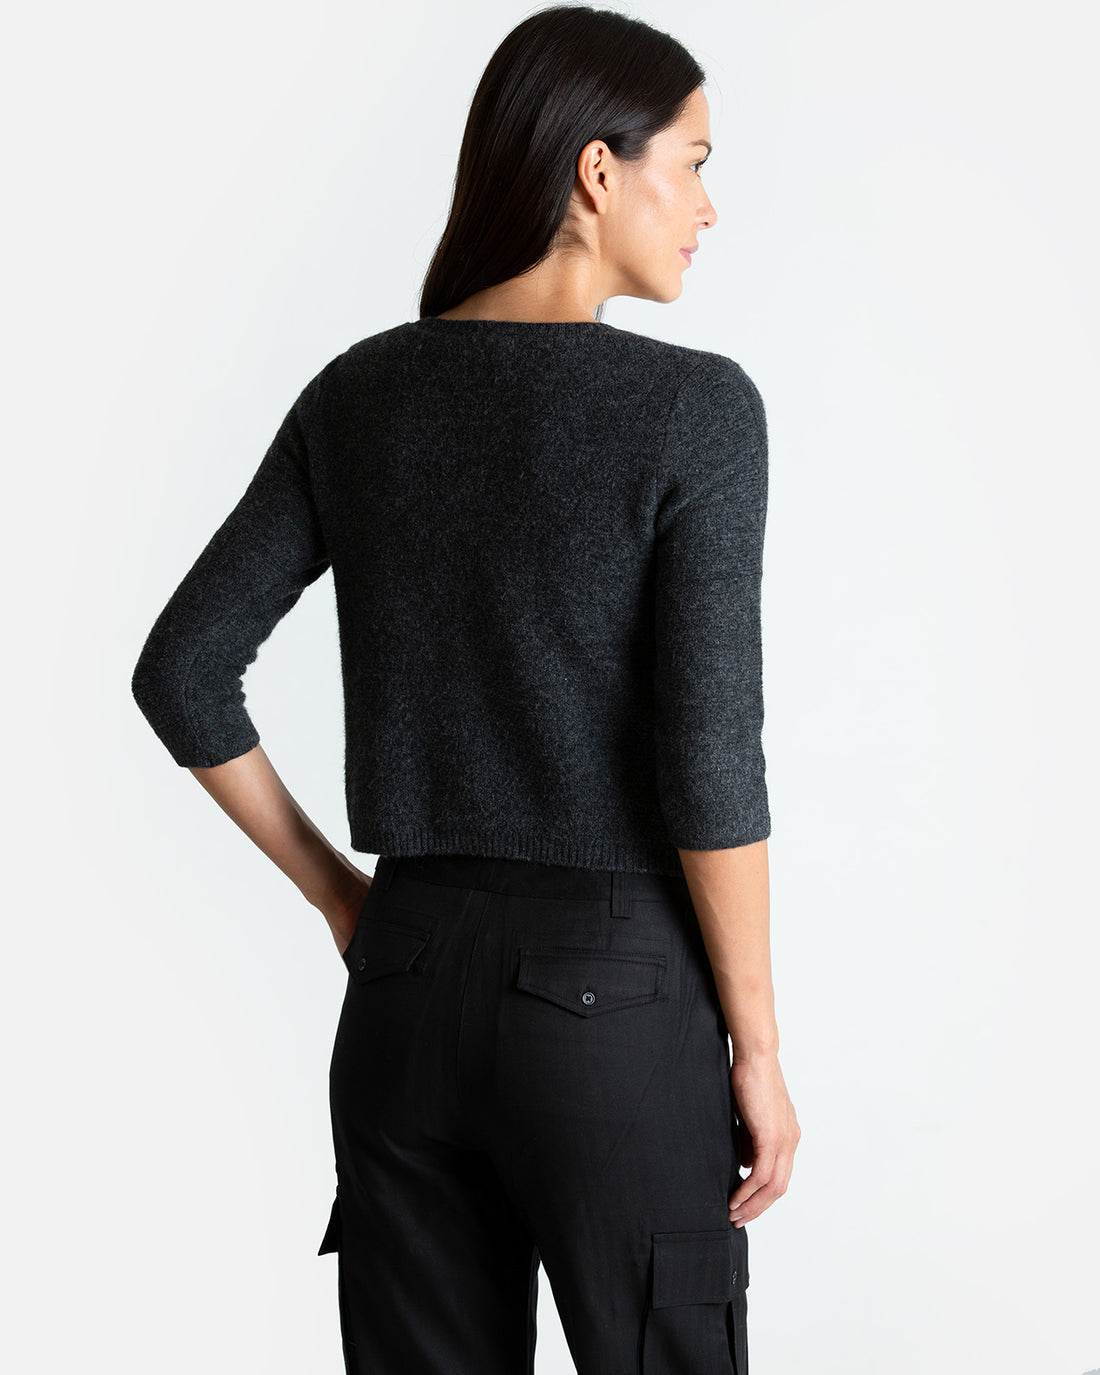 Elexis Cropped Pullover